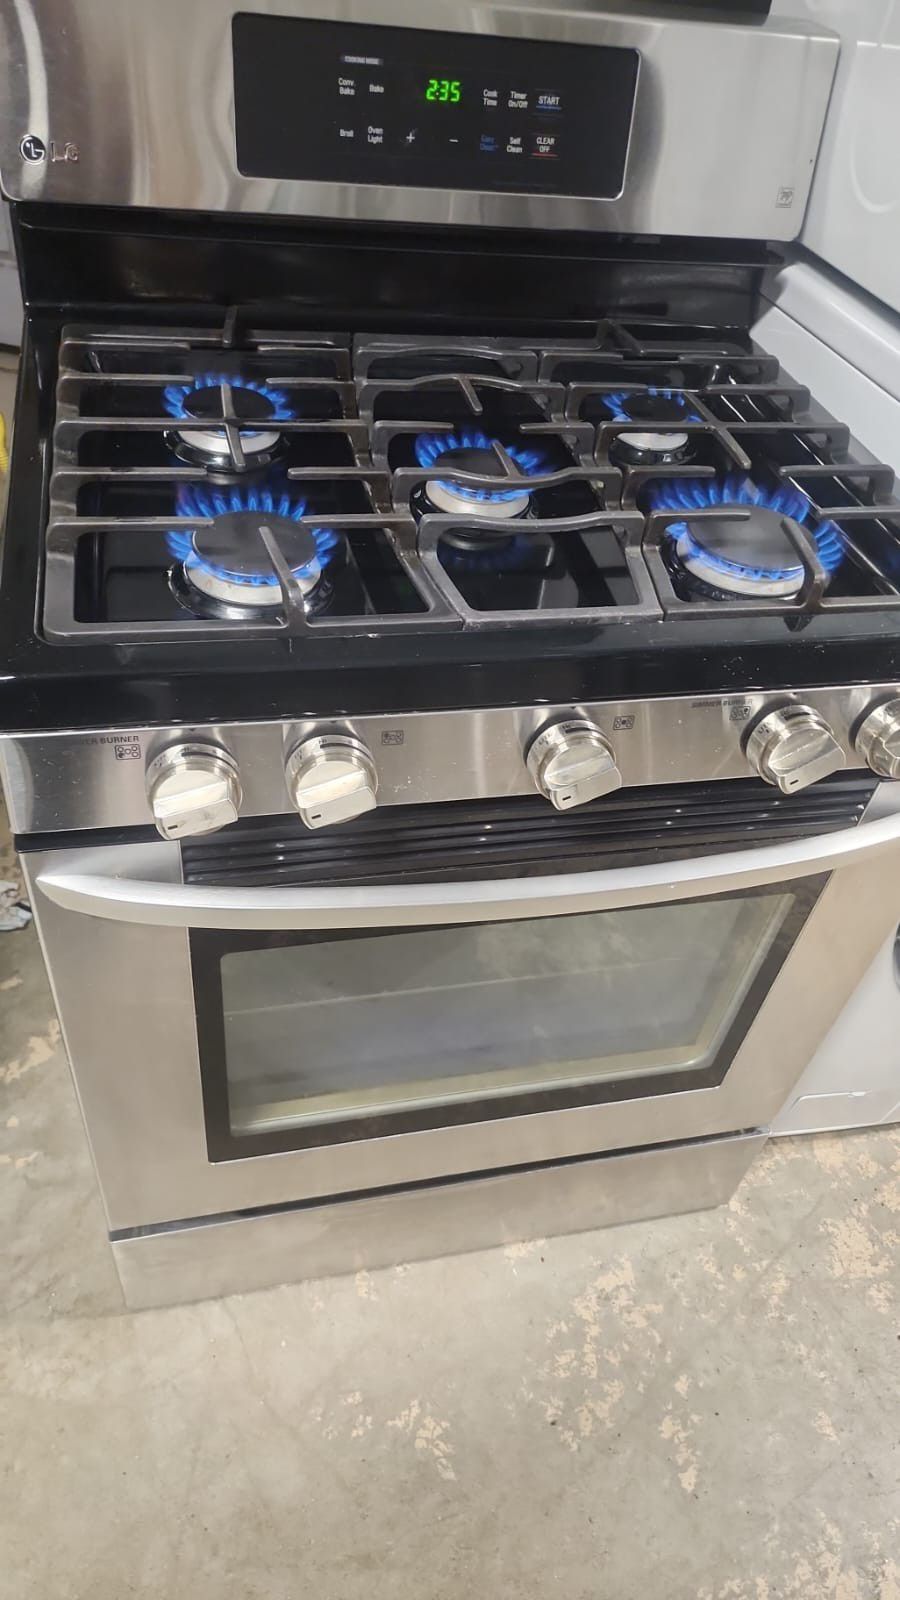 Stove Gas Stainless Steel 5 Burner Oven Conventional Selfclean Work Great Have Warranty Available 